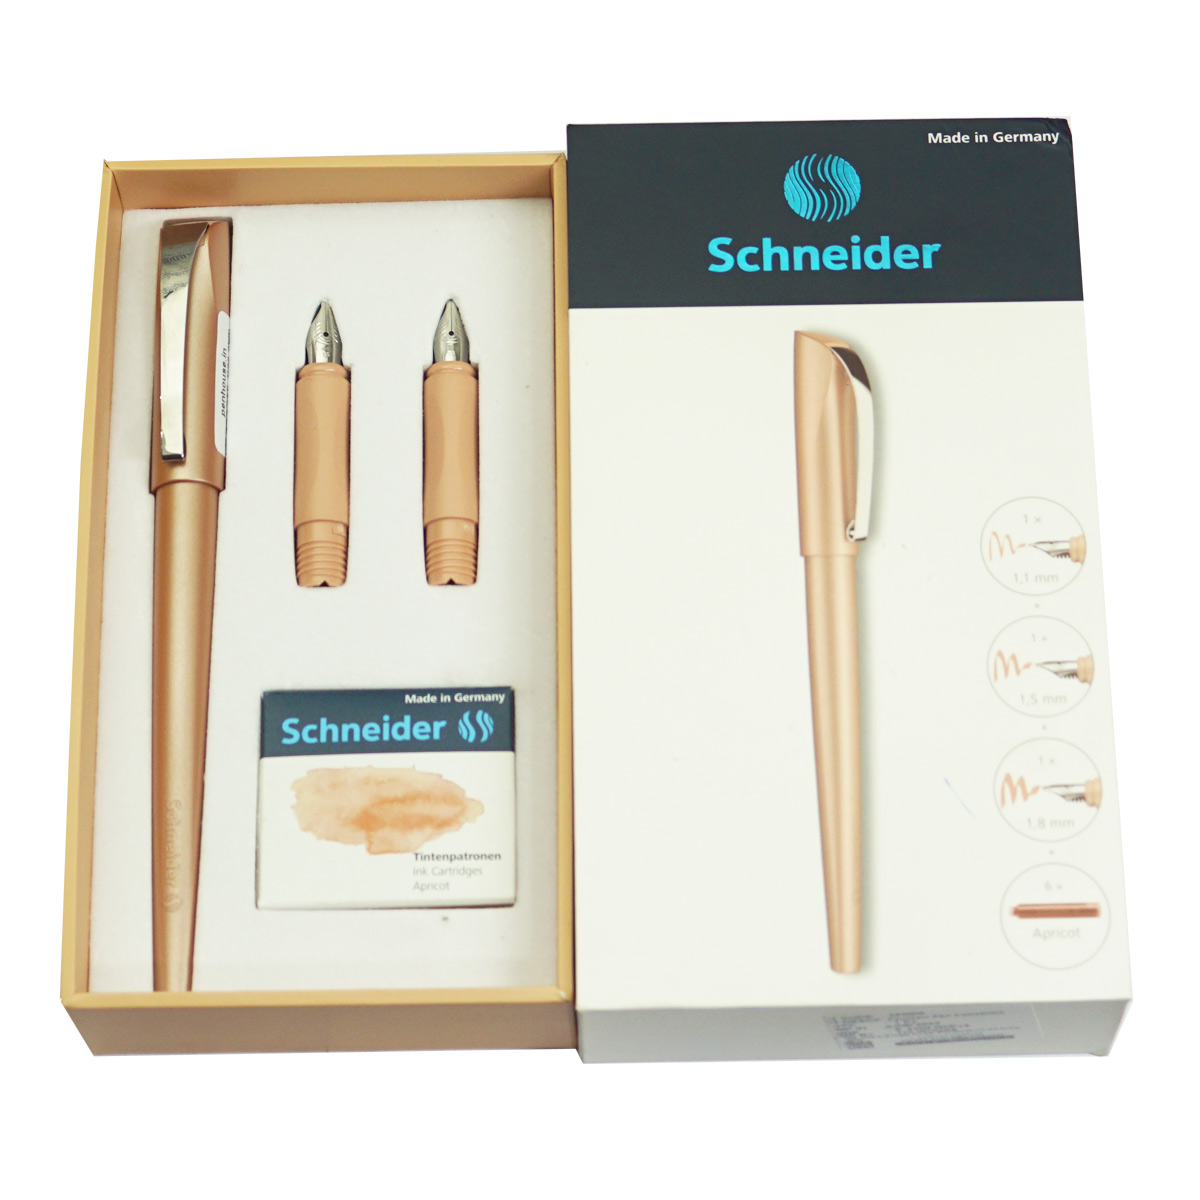 Schneider Callissimia 1.1mm 1.5mm 1.8mm Nibs Peach Color Body With Silver Clip Cartridge Type Fountain Pen Set SKU 23318